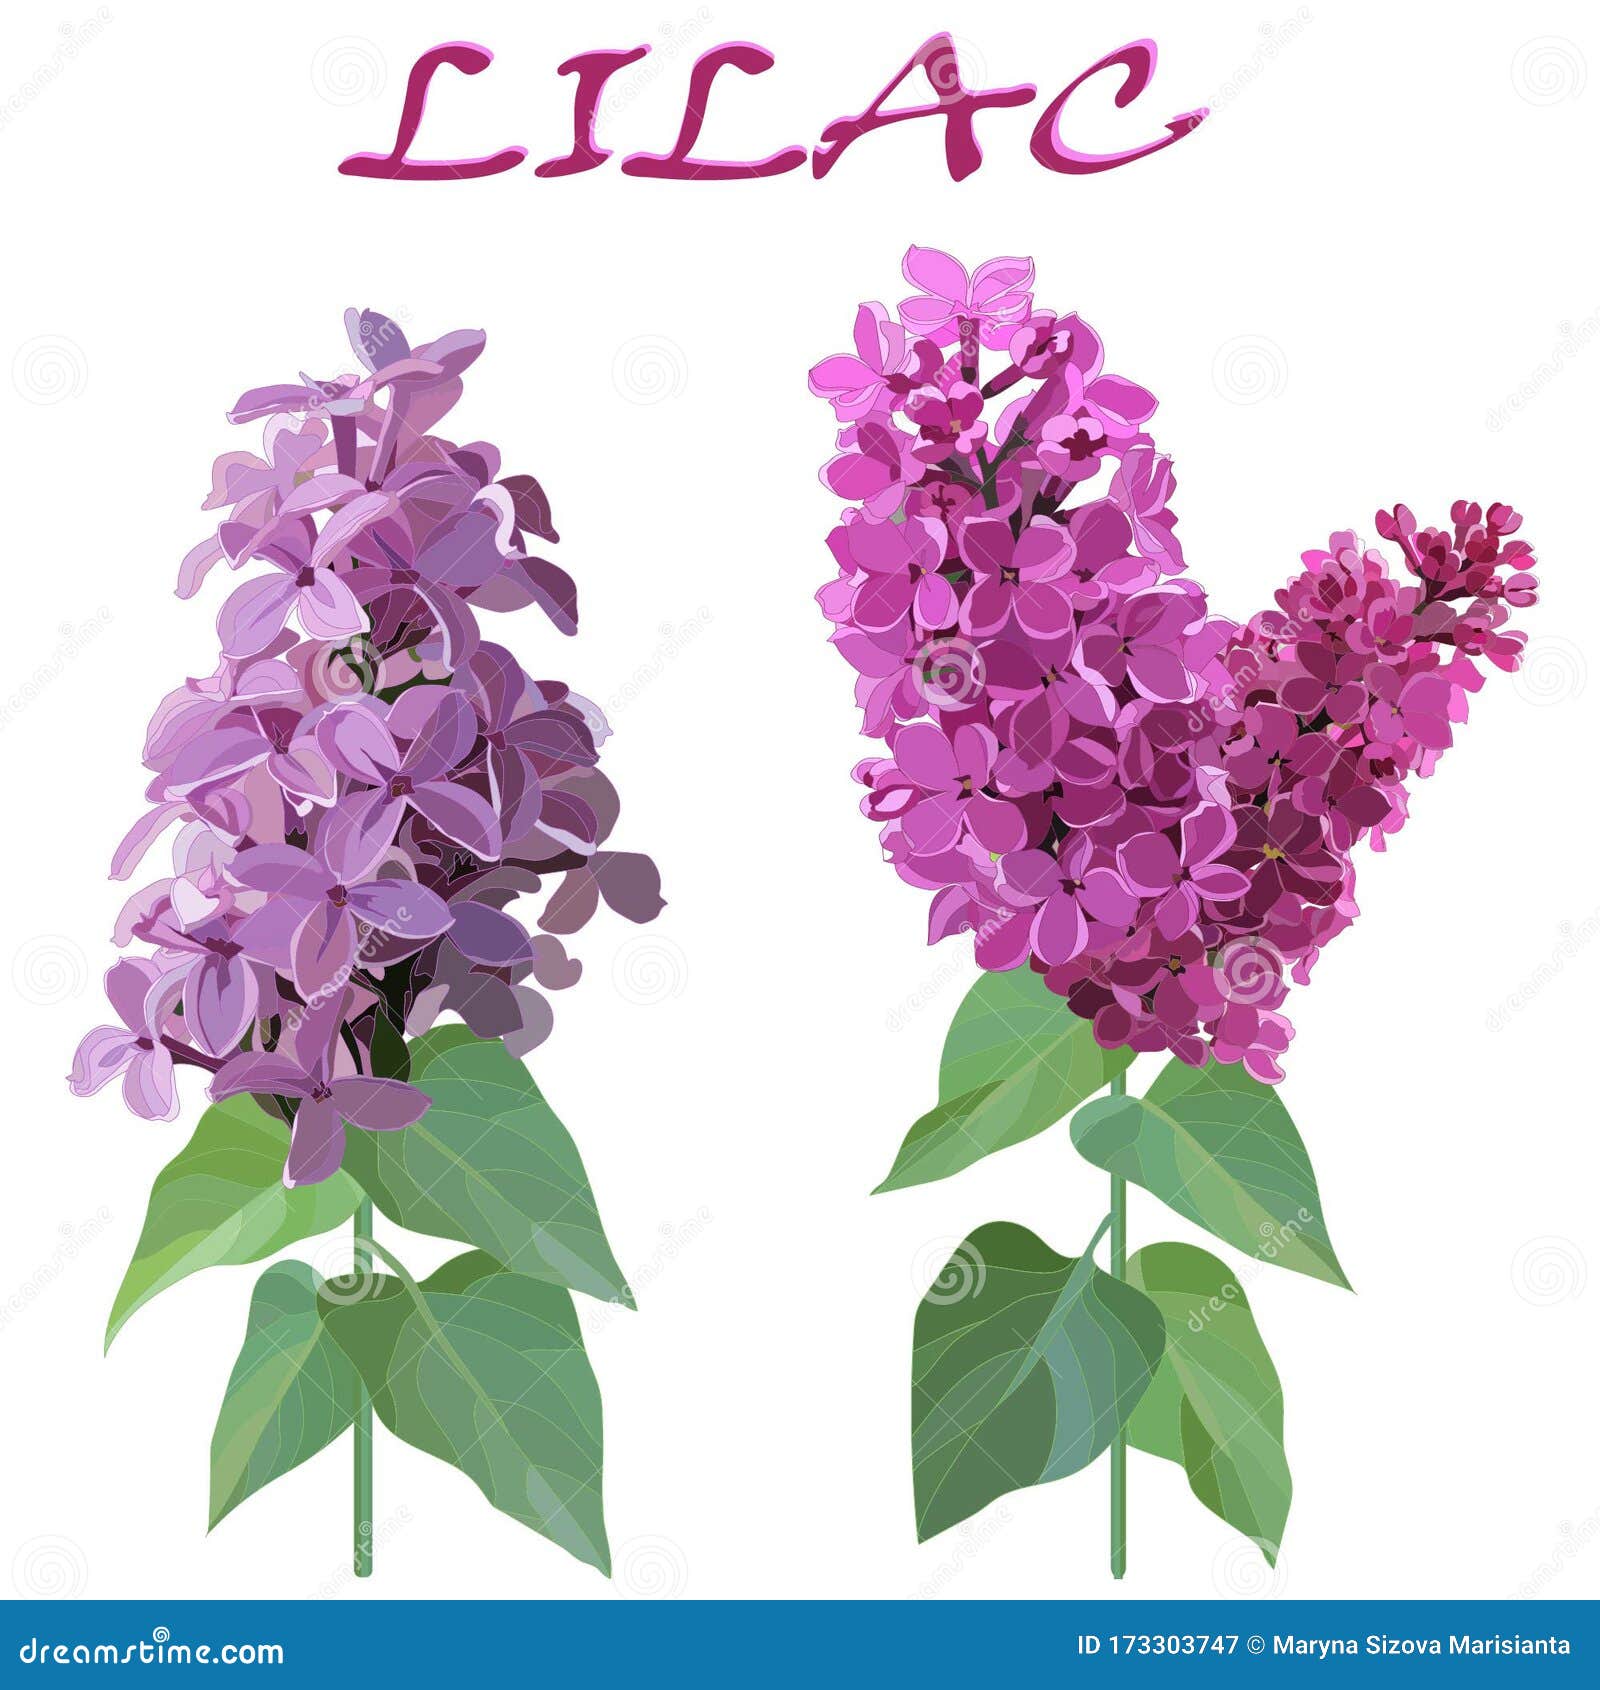 Two Sprigs of Lilac on Stems with Leaves Isolated on White Background ...